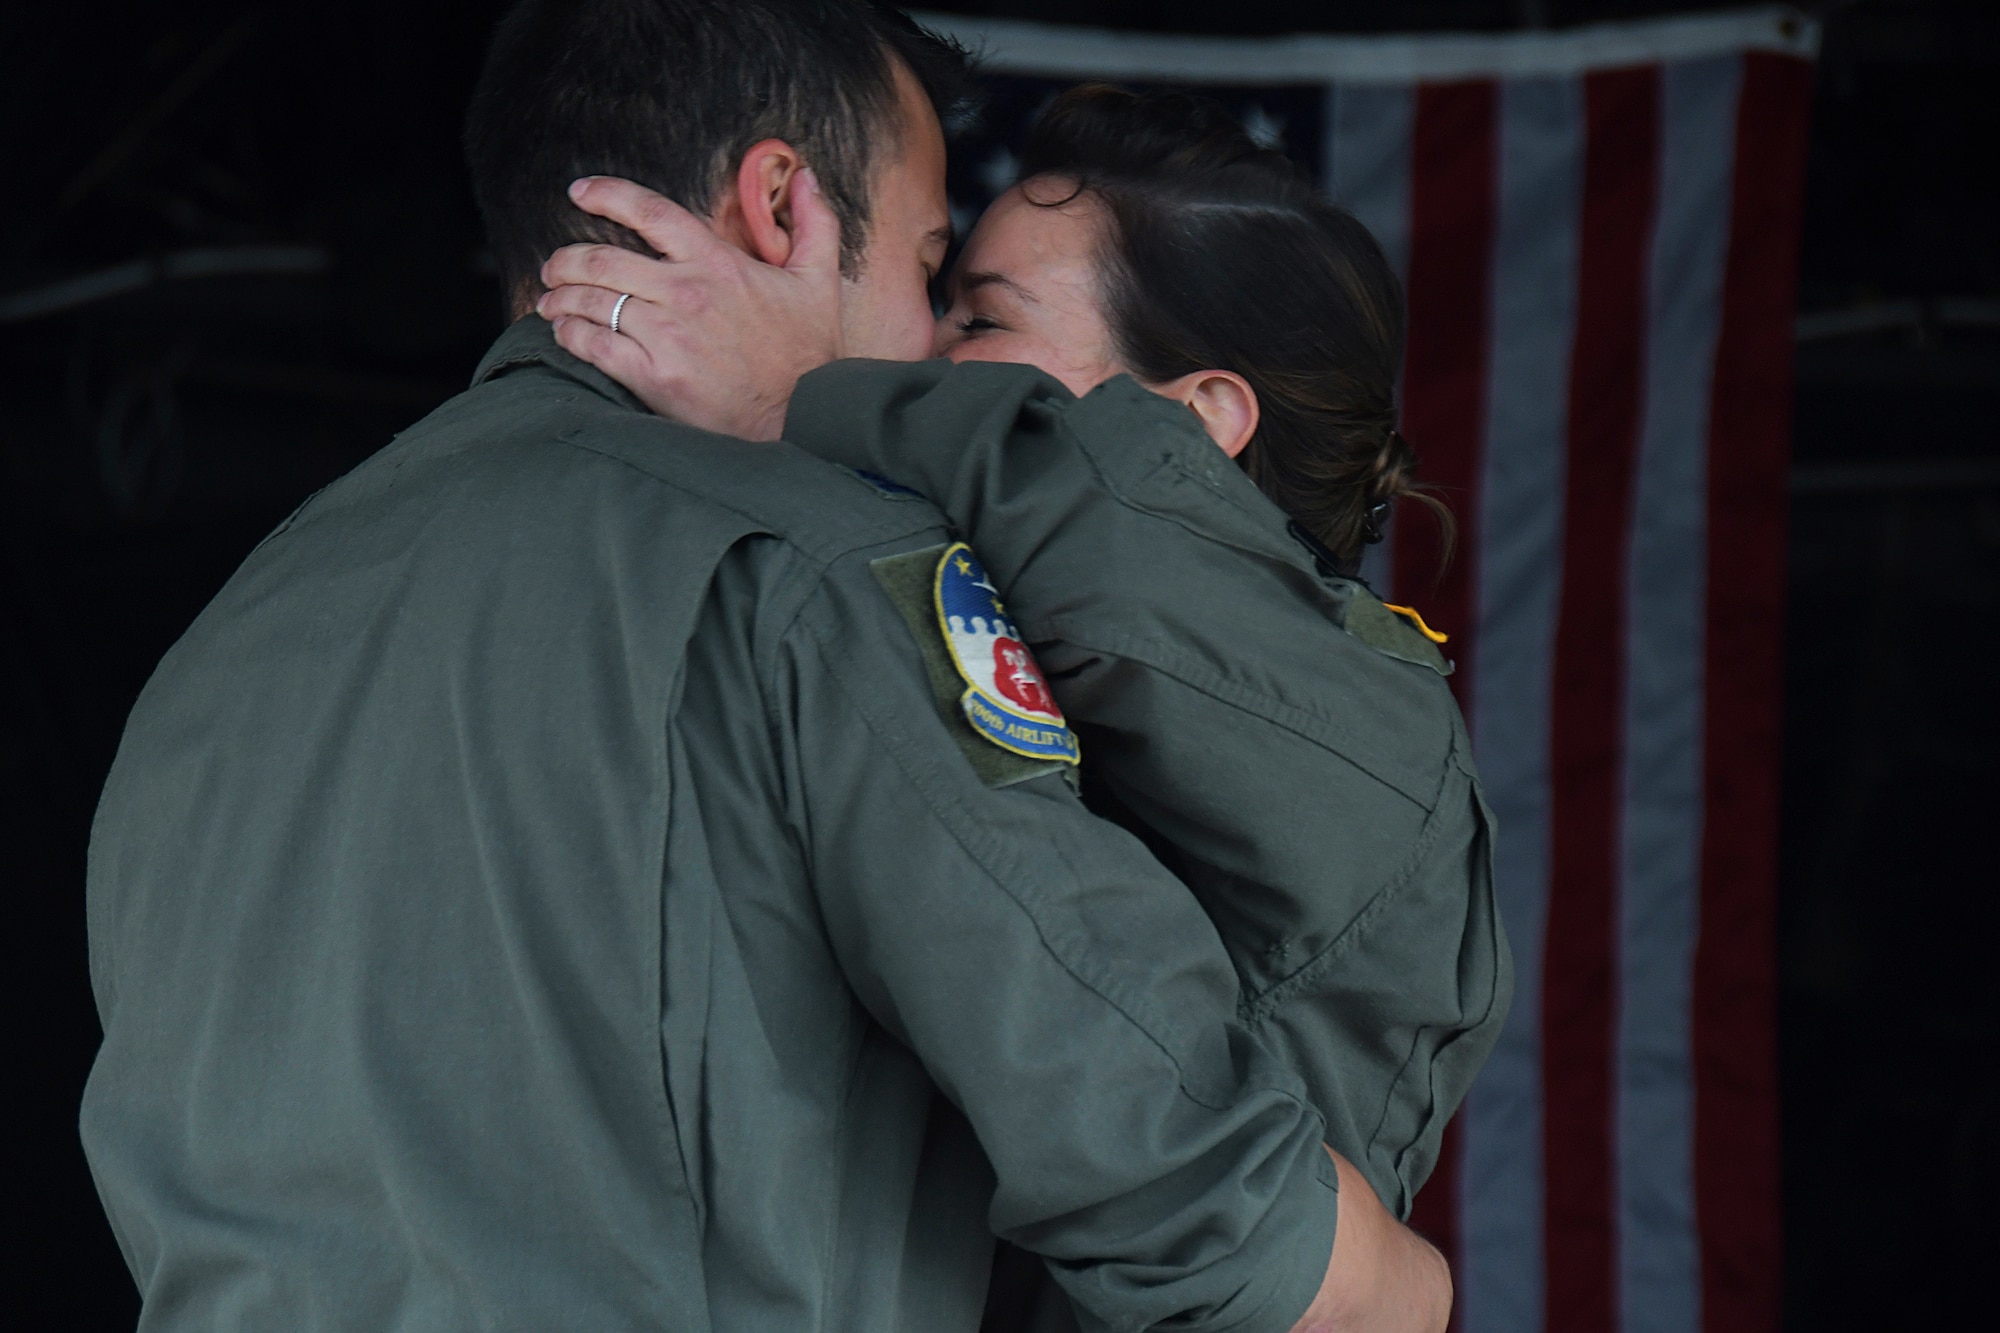 Capt. Will Jones, 700th Airlift Squadron pilot, and 1st Lt. Lyndsy Harrison, a 700th AS navigator, embrace during a wedding ceremony held on the back of a C-130H3 Hercules at Dobbins Air Reserve Base, Ga. on Nov. 10, 2020. The couple came up with the idea to get married on the back of a C-130 to honor their love of aviation. (U.S. Air Force photo/Andrew Park)